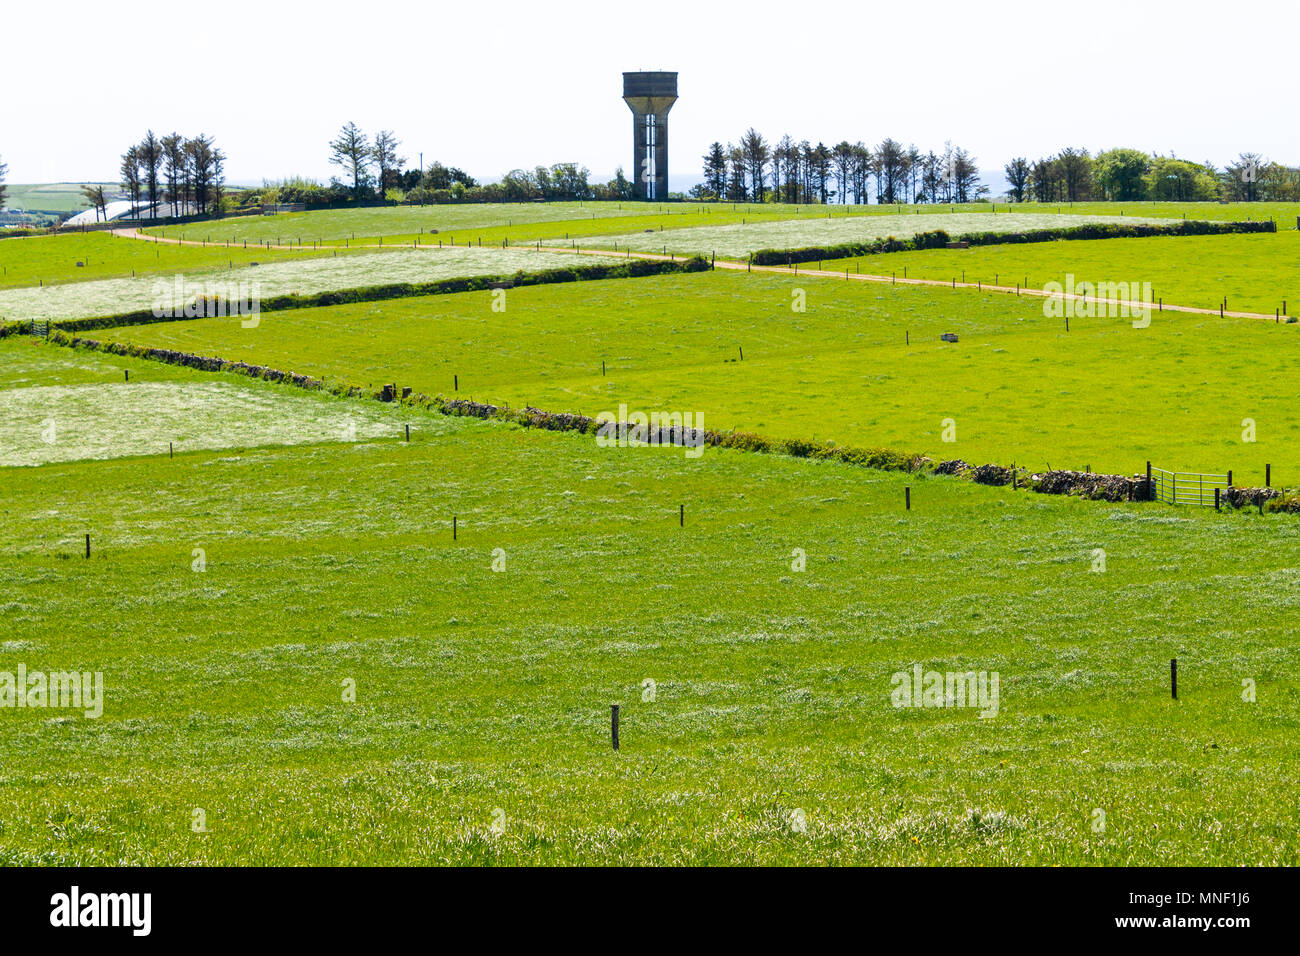 water storage tower made of concrete on the horizon with green fields of grass bordered by hedges in cork county, ireland Stock Photo